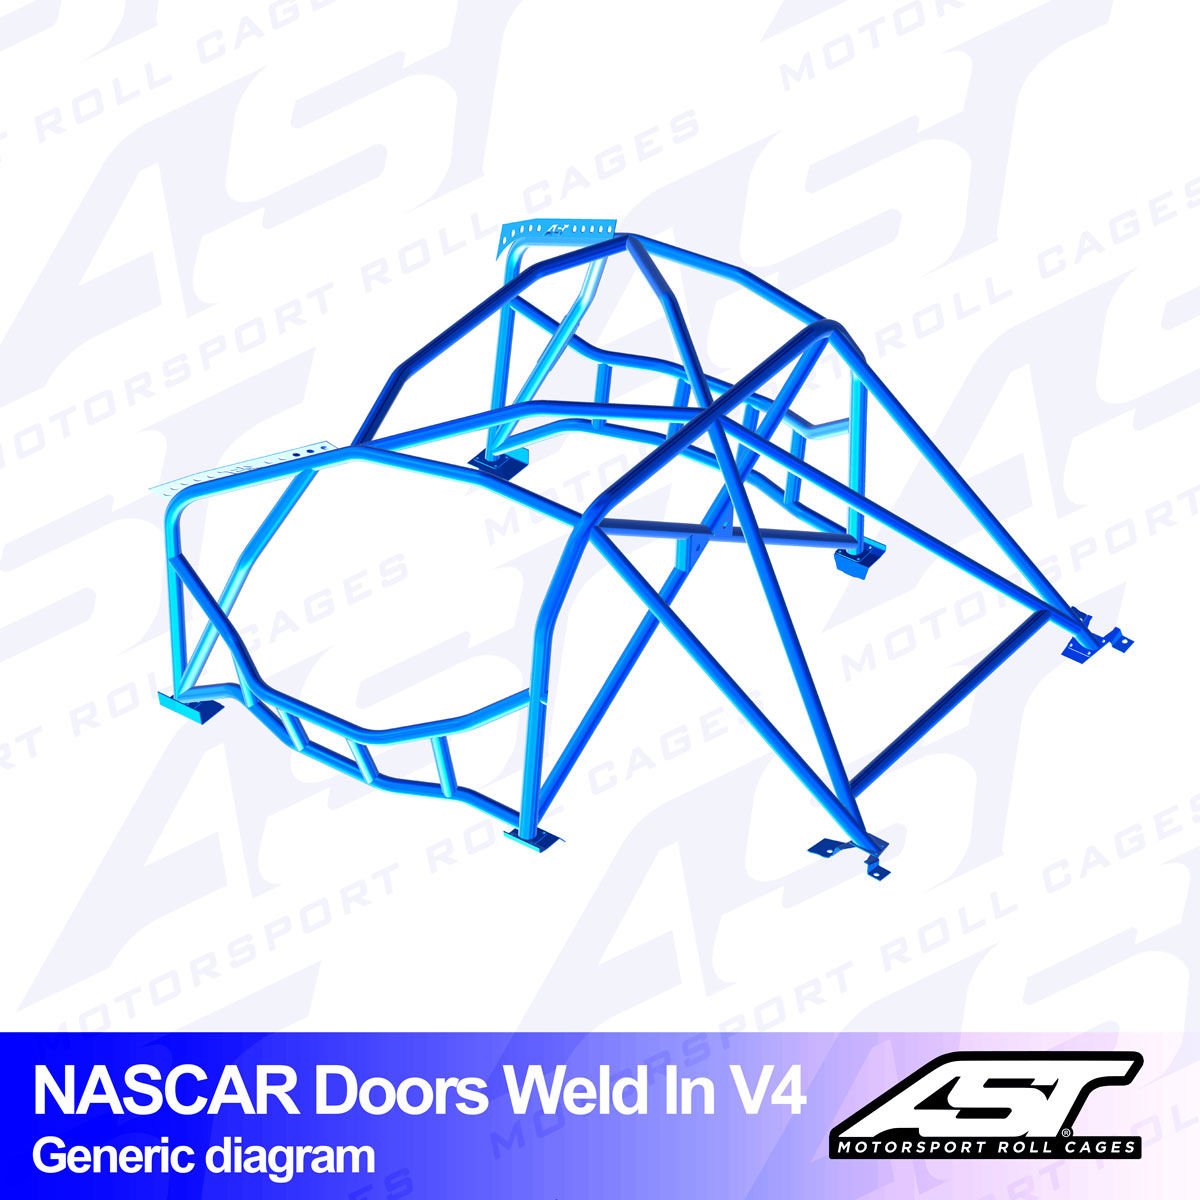 Roll Cage BMW (E34) 5-Series 5-doors Touring RWD WELD IN V4 NASCAR-door for drift